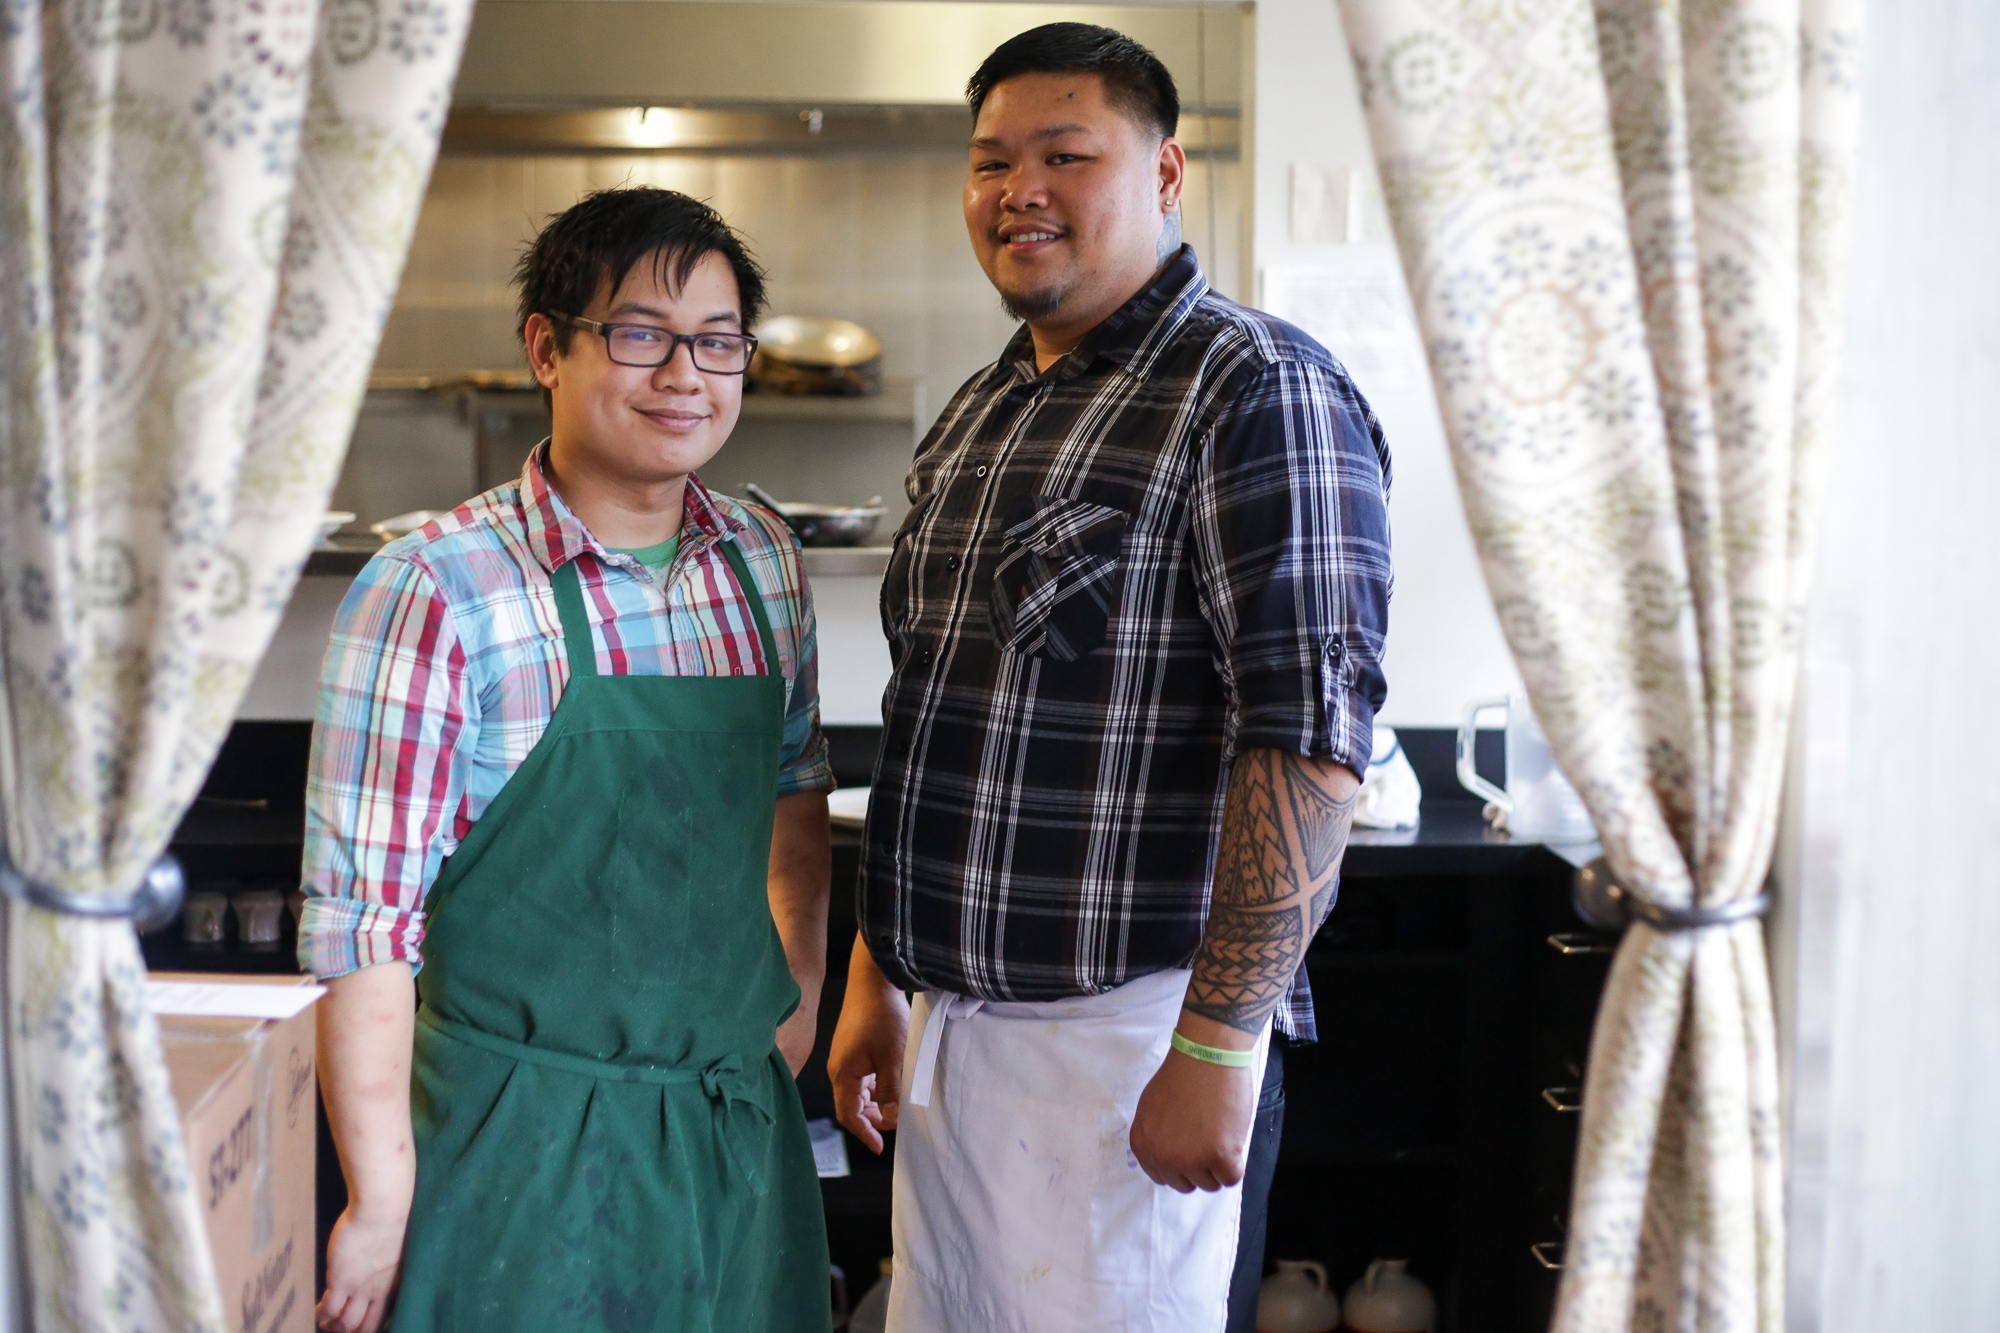 Irbille Donia, right, with his friend and fellow Filipino cook, Justin Legaspi. Photo by Joshua Bessex